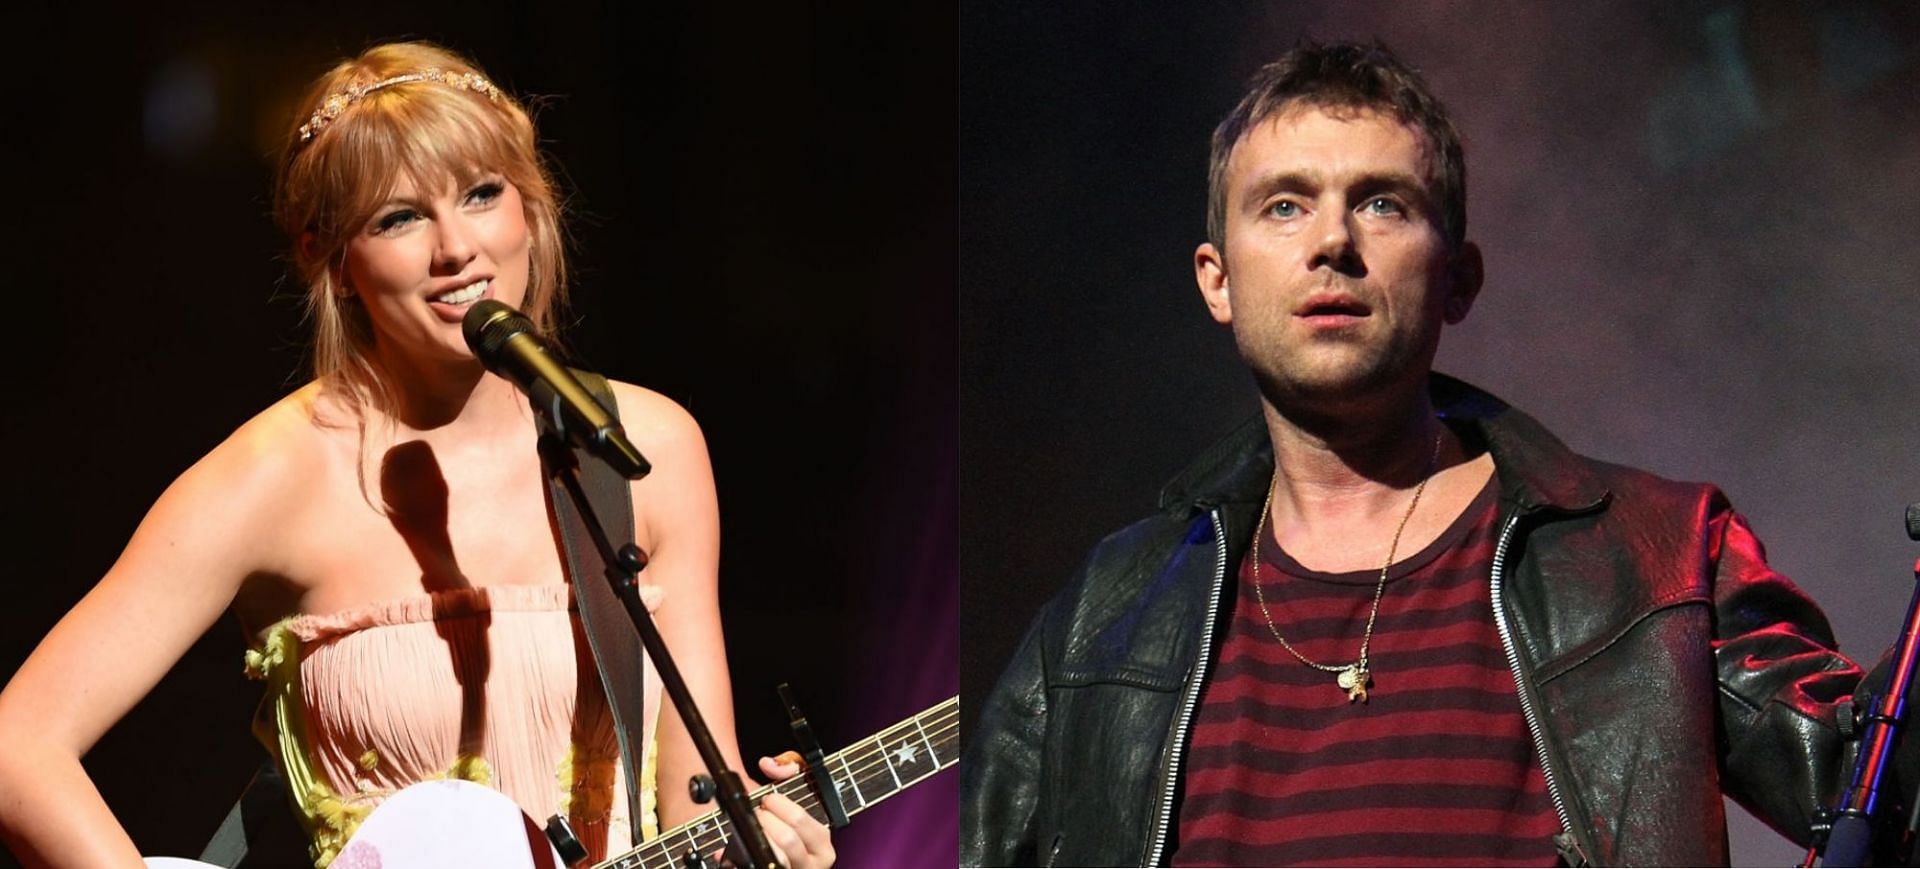 Damon Albarn came under fire after claiming Taylor Swift does not write her own songs (Image via Getty Images)